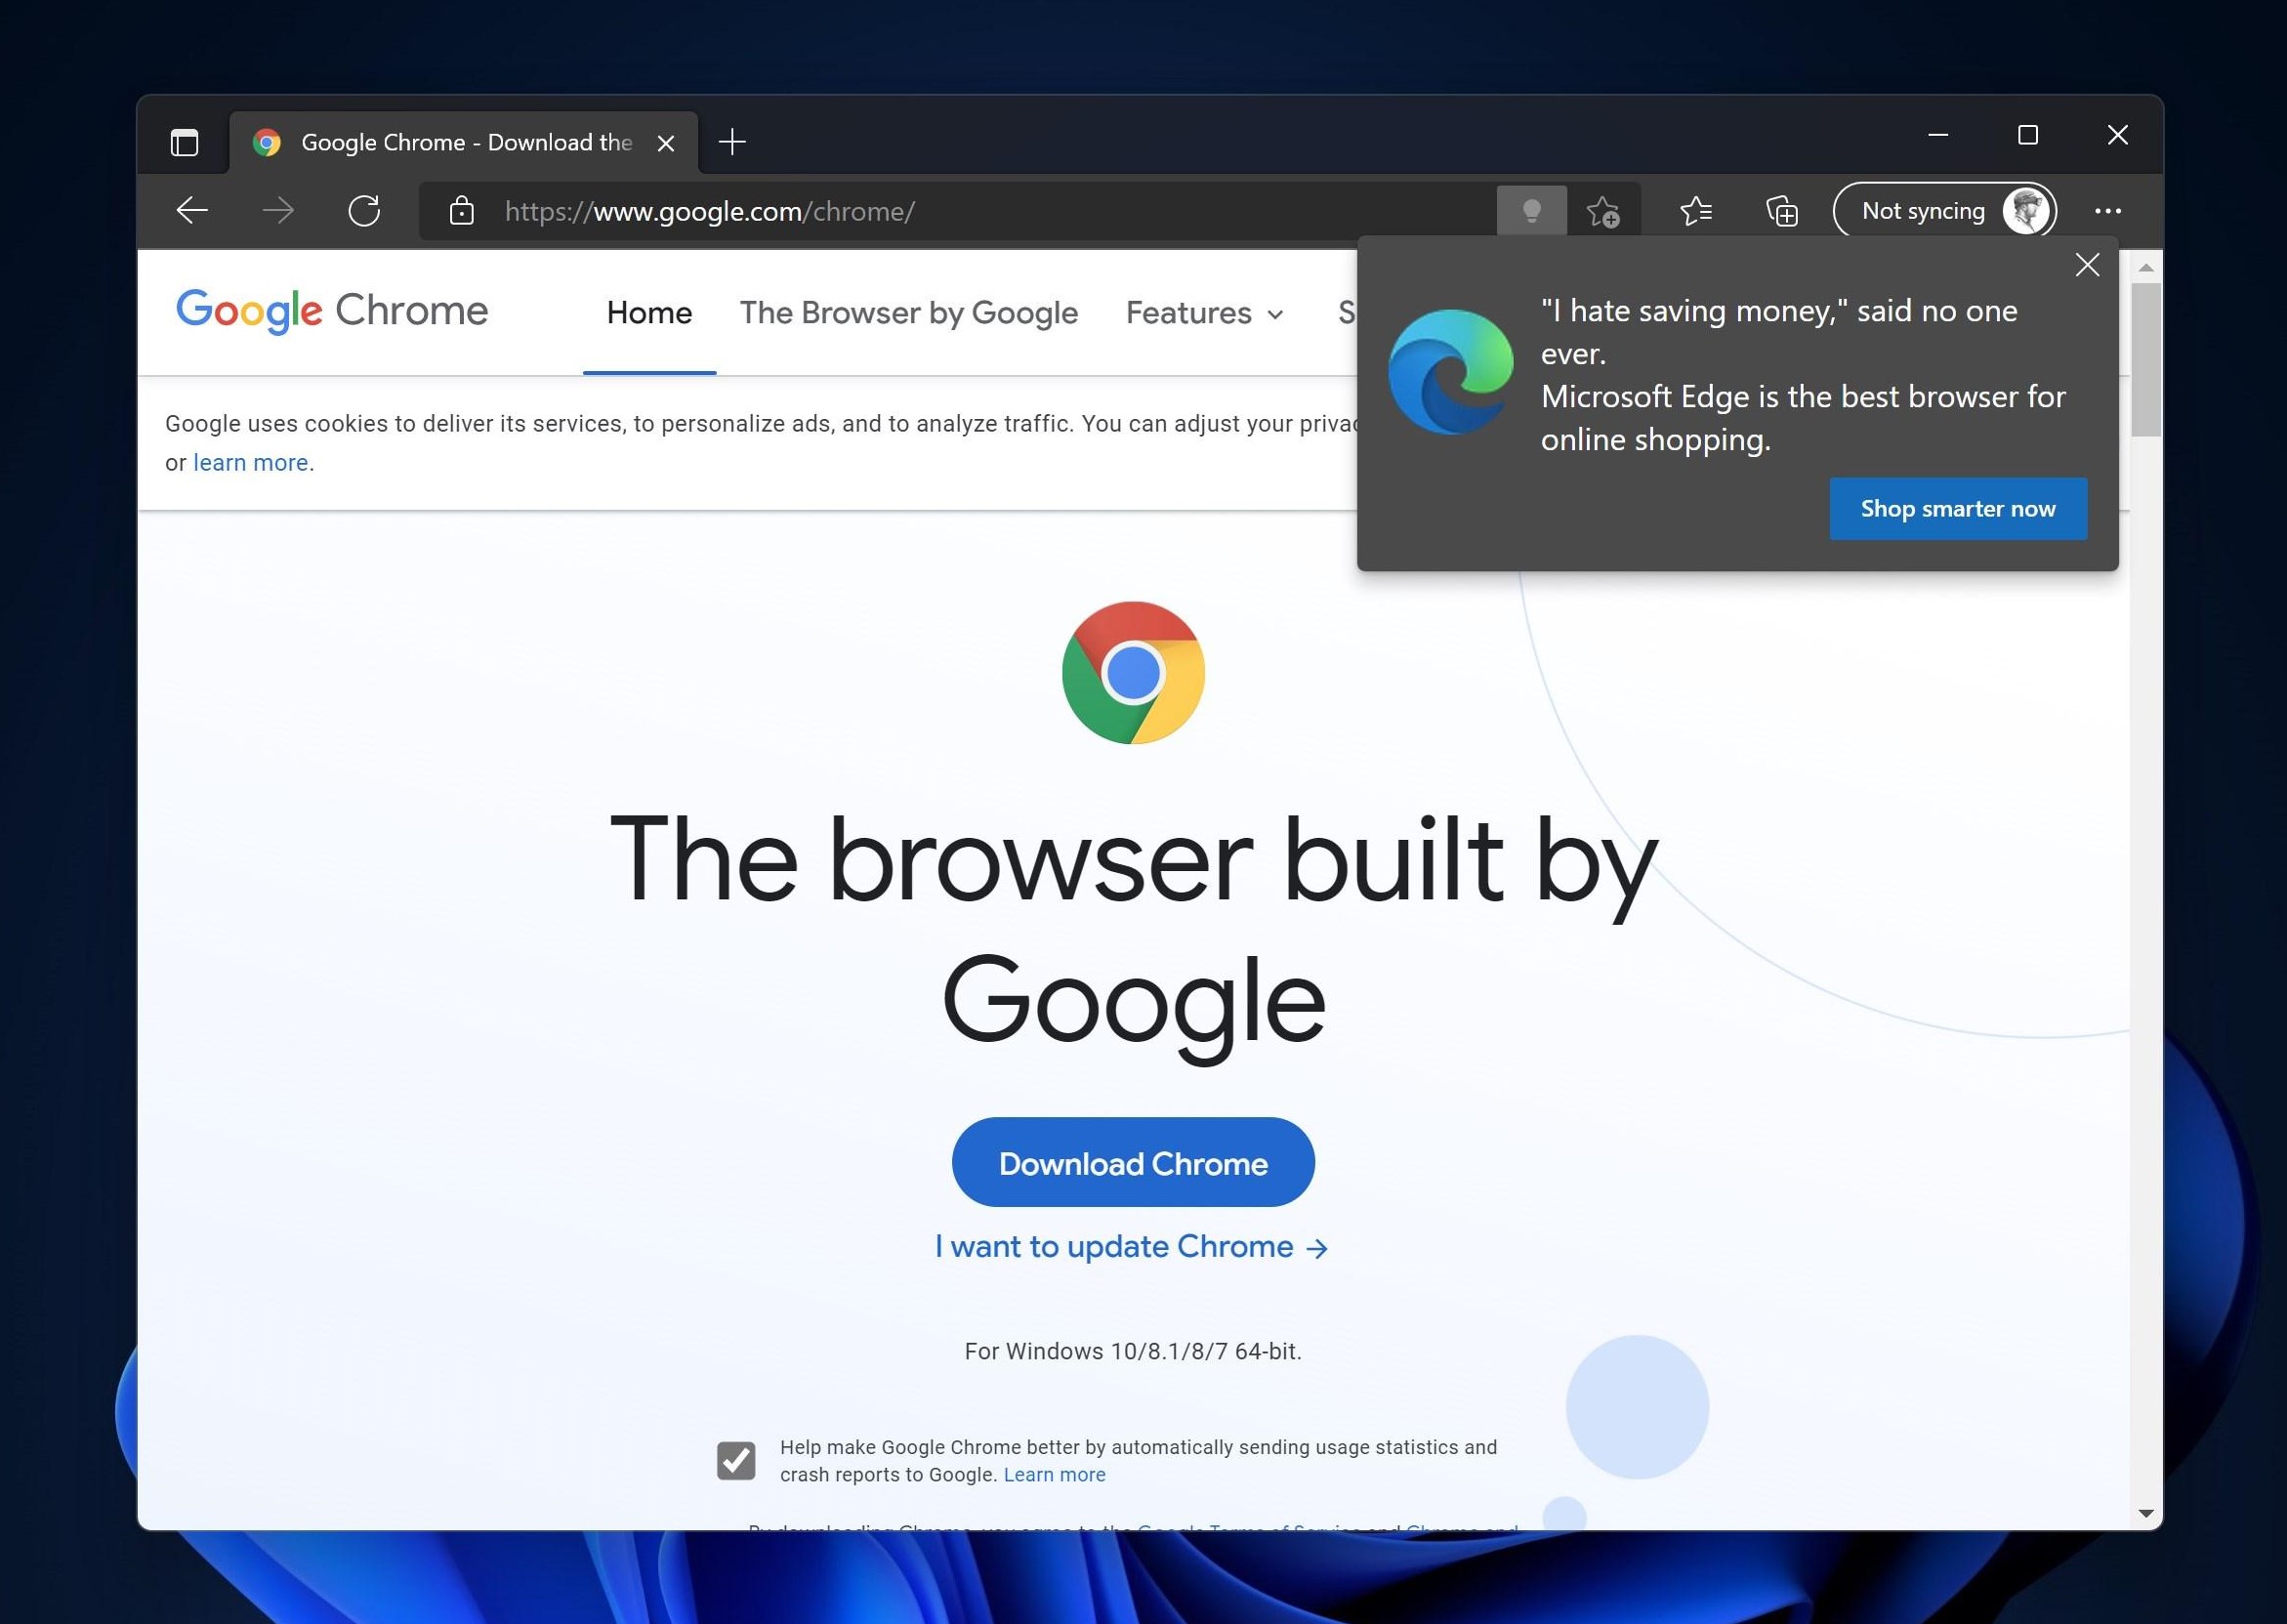 If you are encountering issues with your current web browser, try using a different one.
Download and install an alternative web browser, such as Google Chrome, Mozilla Firefox, or Microsoft Edge.